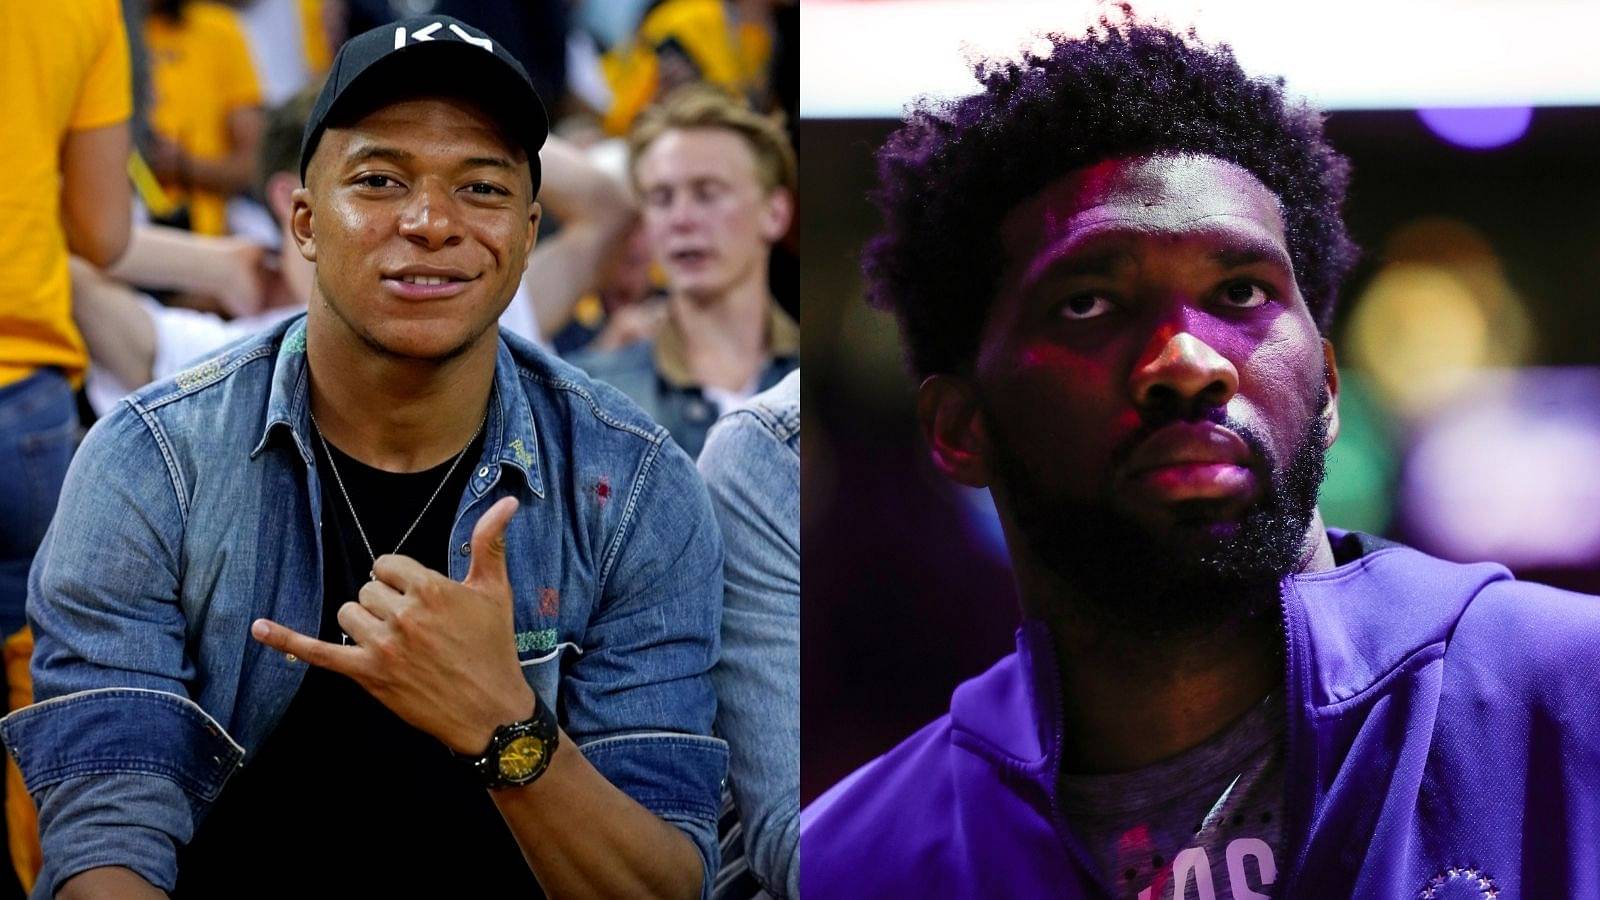 "Kylian Mbappe will finish as the BEST in football history": Joel Embiid predicts PSG star to end up as GOAT, excited about his arrival in Madrid next season